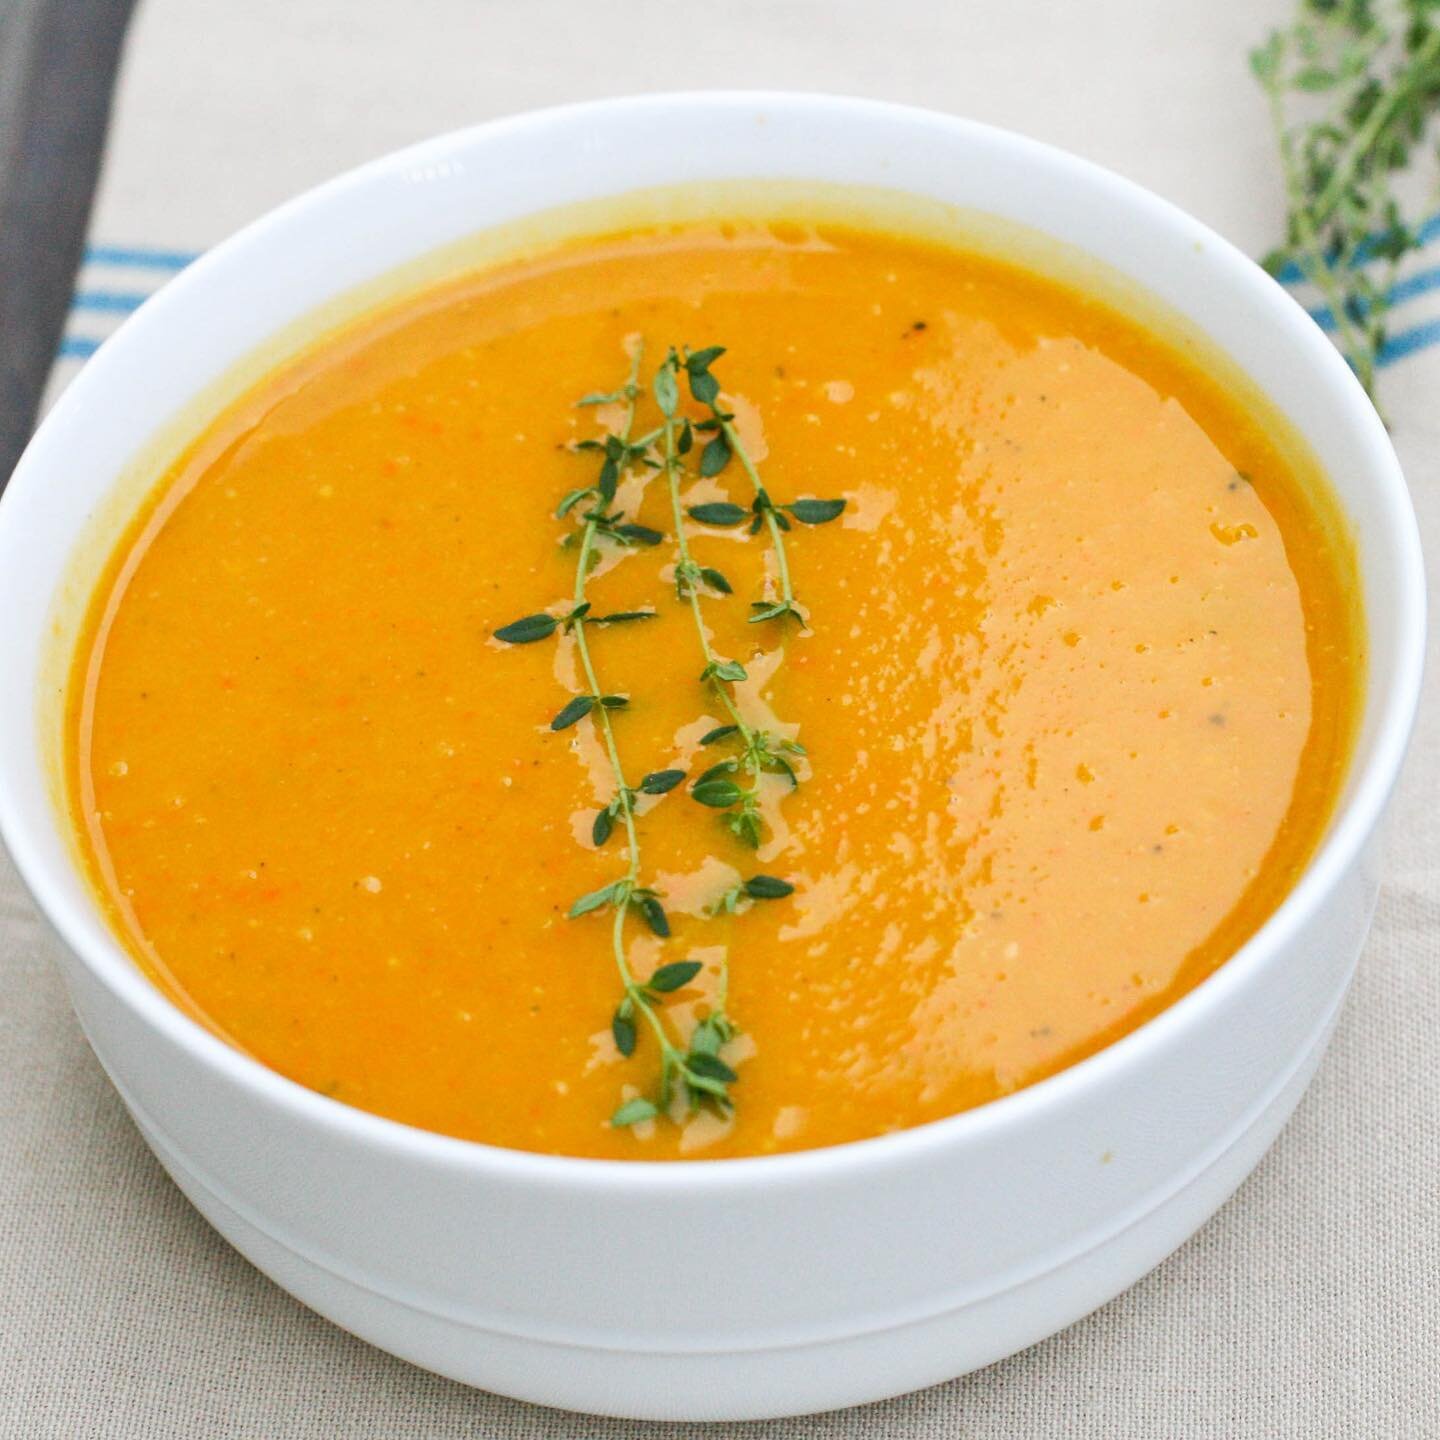 Have you tried our incredibly delicious Roasted Butternut Squash Soup. 

#caperstoo #caperstoodeli #danburydeli #danburyct #brookfieldct #bethelct #newfairfieldct #newtownct #sandyhookct #butternutsquash #butternutsquashsoup #roastedbutternutsquashso